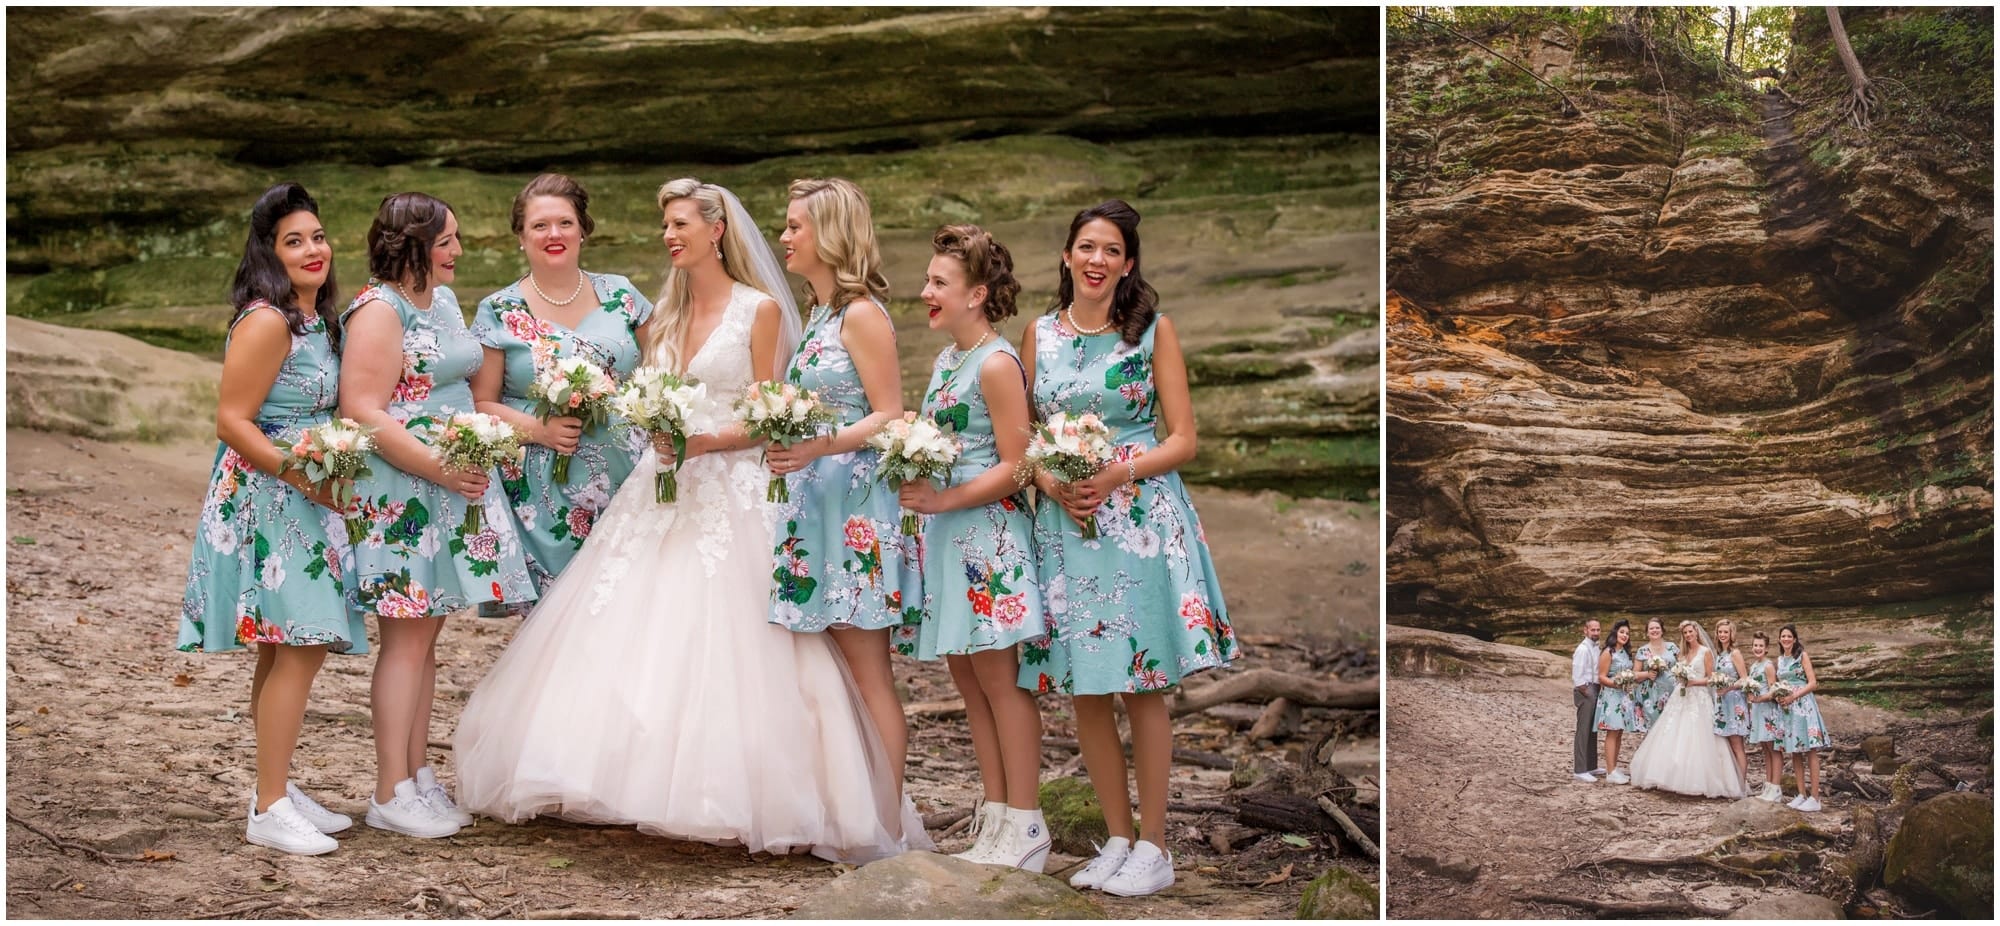 Starved Rock State Park Lodge Wedding Photographer wedding party Portrait in Canyon 